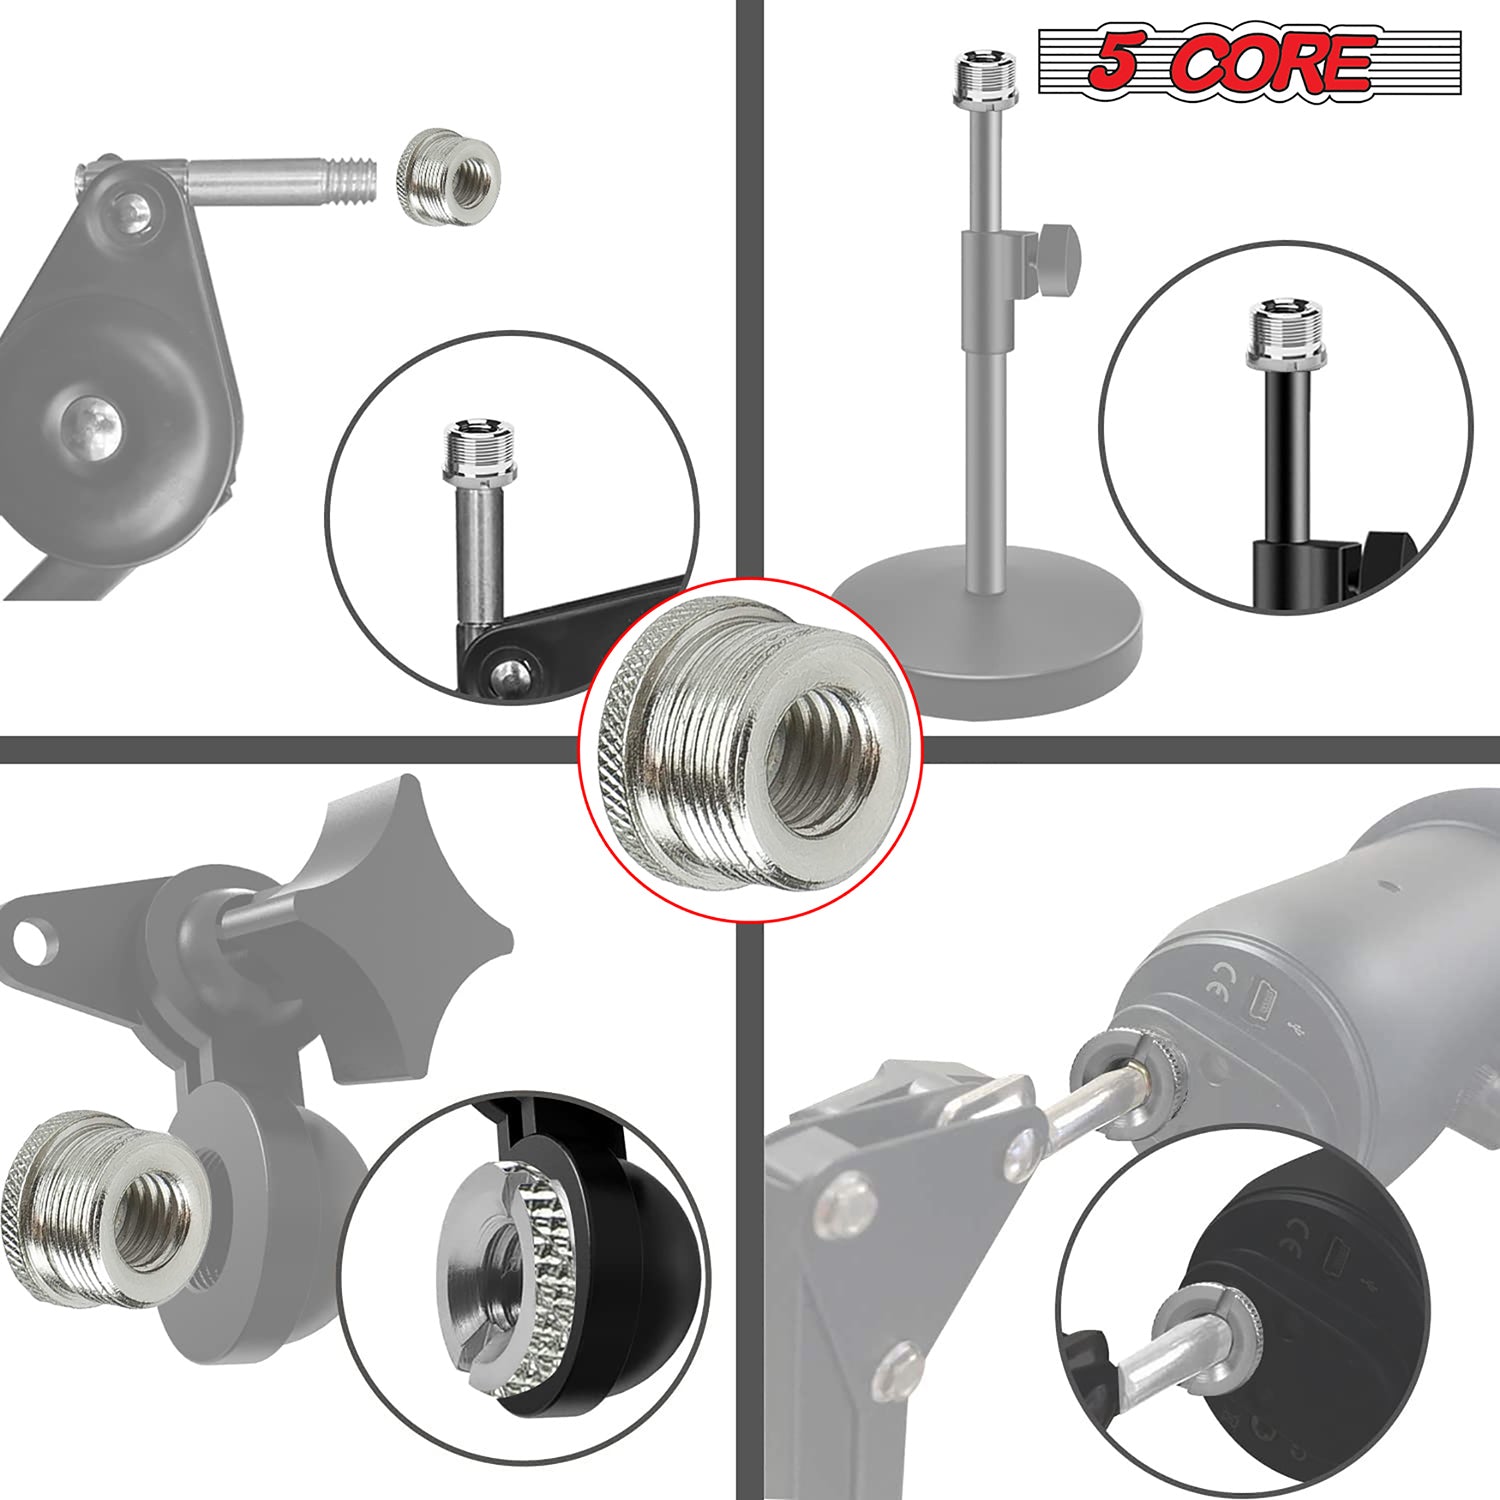 5Core Mic Stand Adapter 5/8 Male to 3/8 Female Screw Adapter w Knurled Surface Adopter 2/4/12 Pc